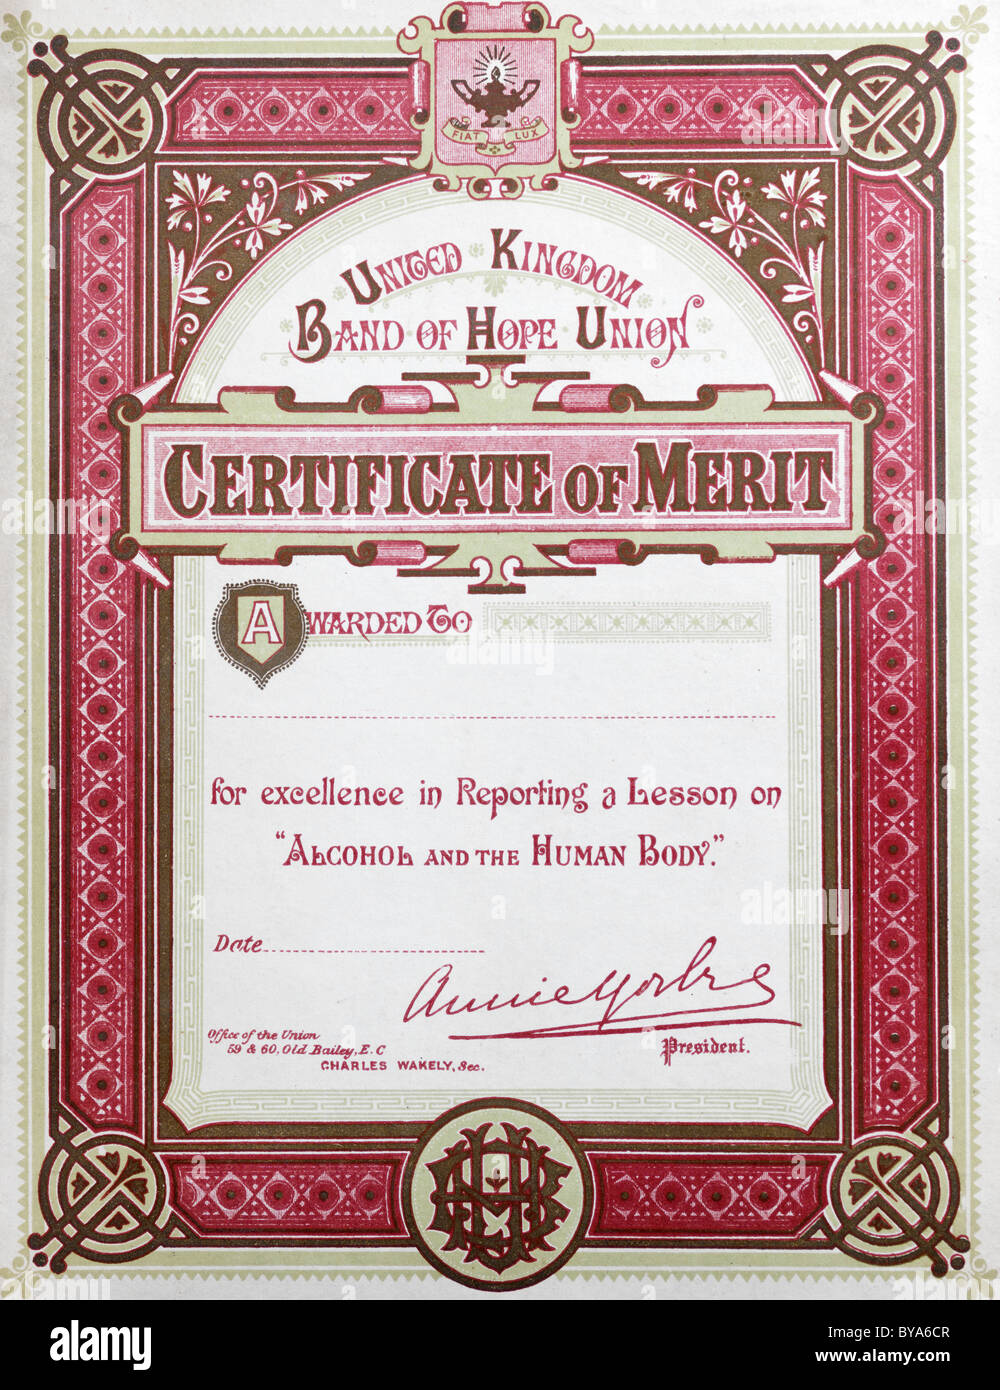 An Old Certificate Of Merit For Excellence In Lessons On Alcohol And The Human Body Stock Photo